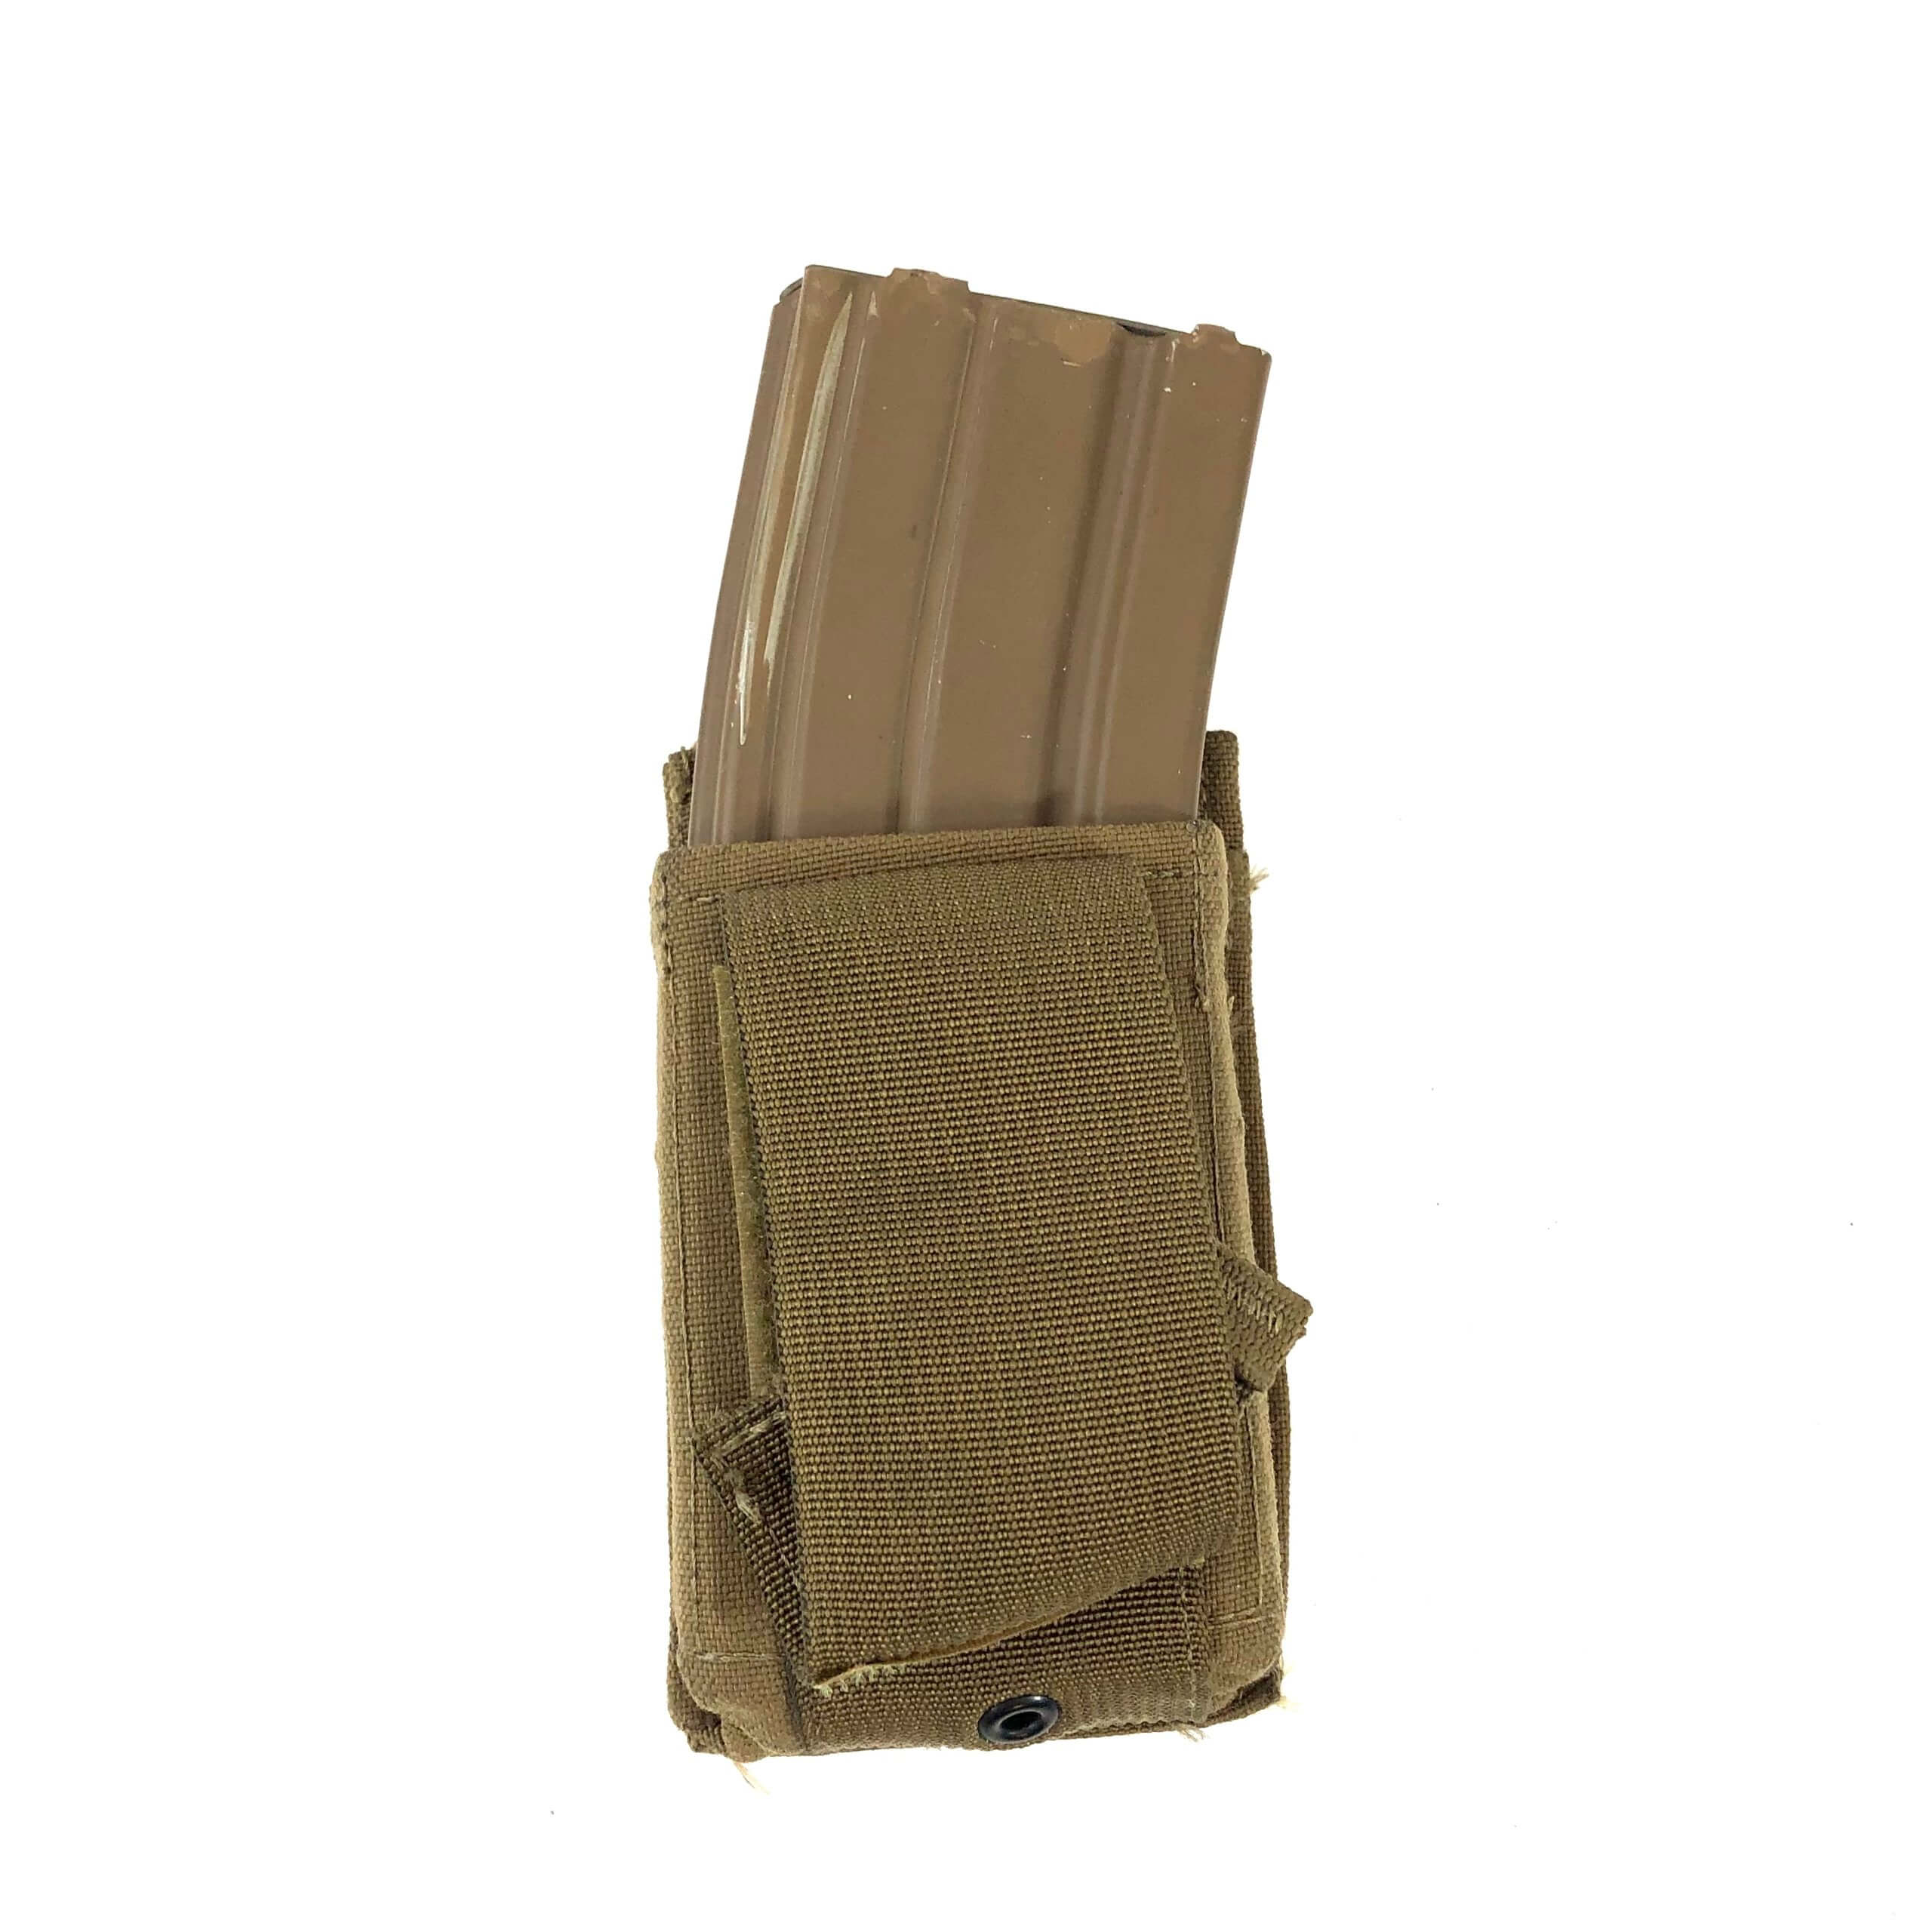 Qty 2 USMC MOLLE Specialty Defense Double Magazine Pouch Coyote Brown USGI 